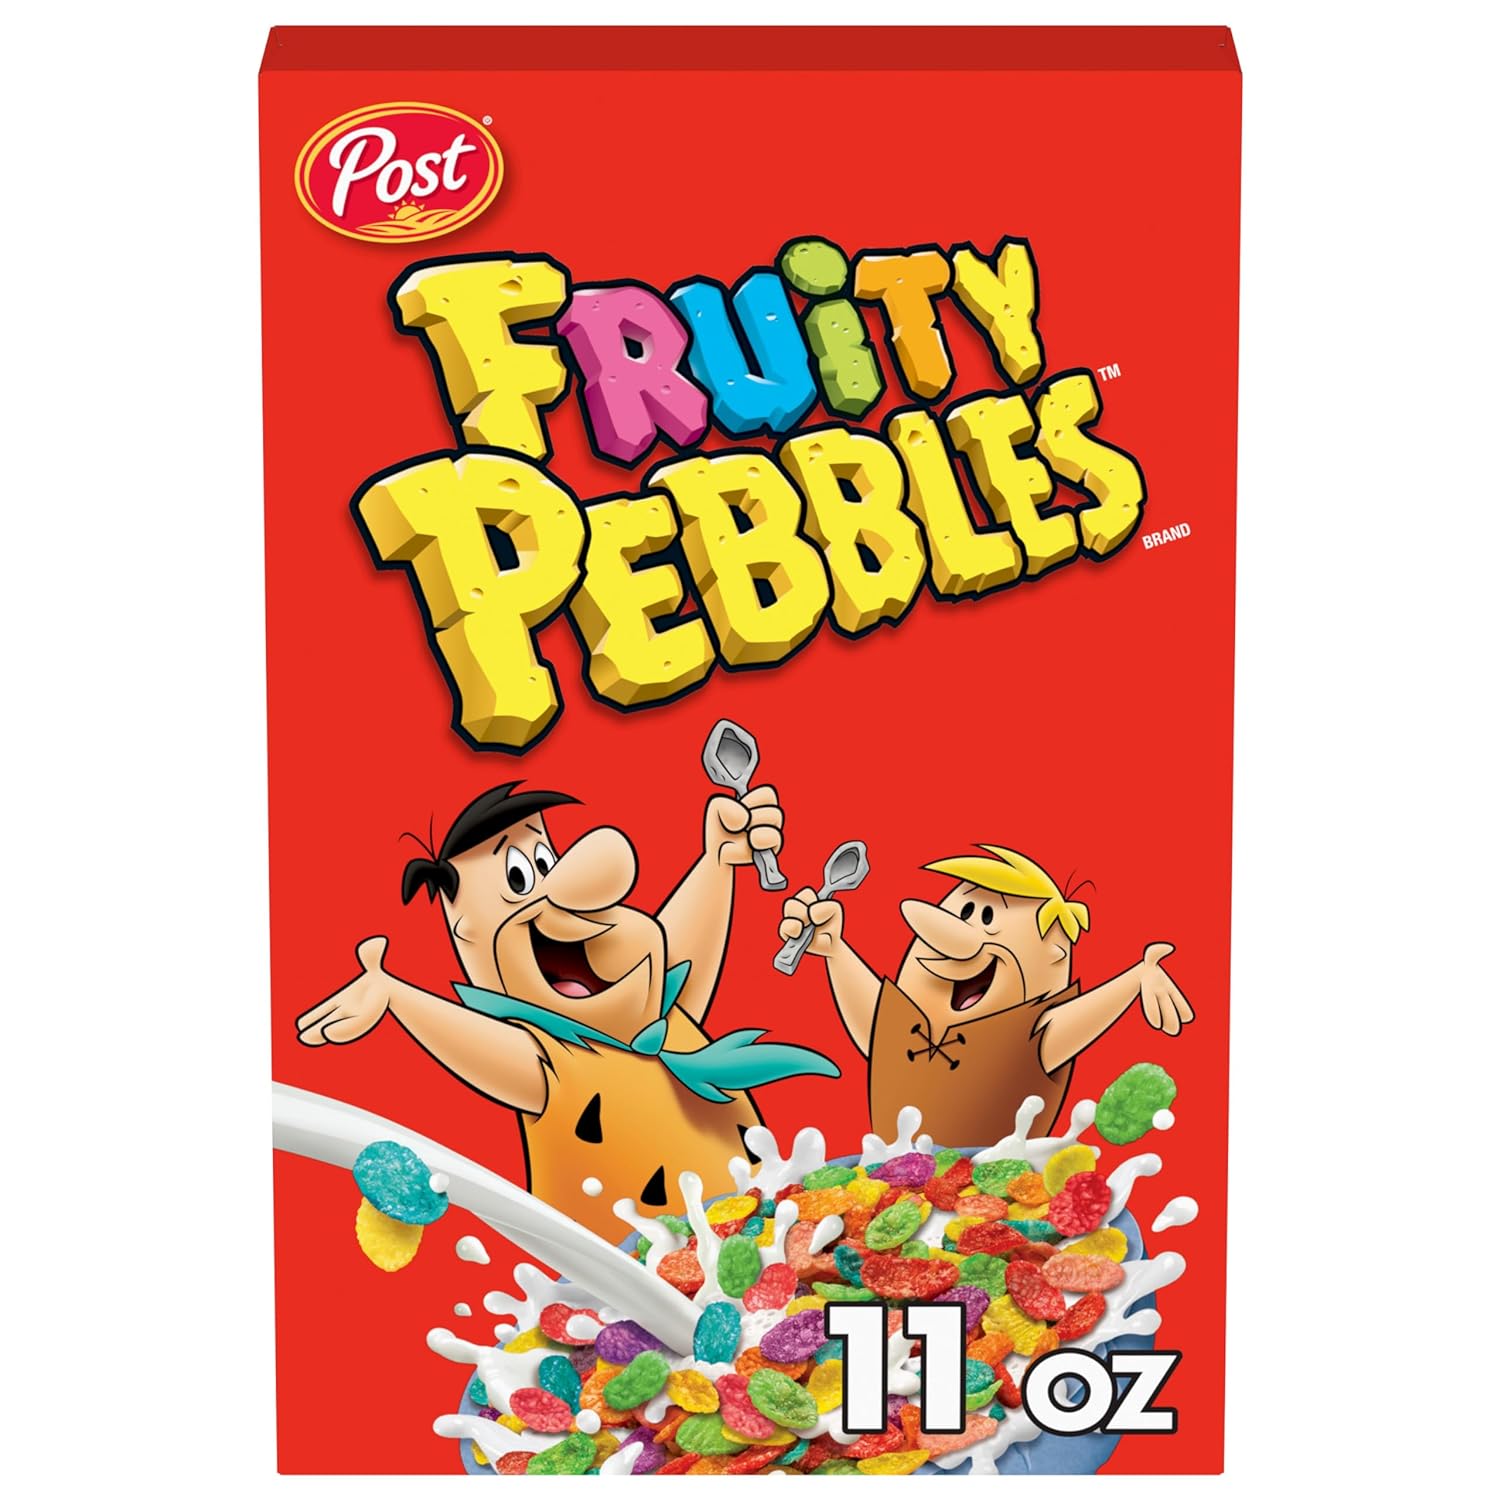 Pebbles Fruity PEBBLES Cereal, Fruity Kids Cereal, Gluten Free Rice Cereal for Kids, 11 OZ Cereal Box